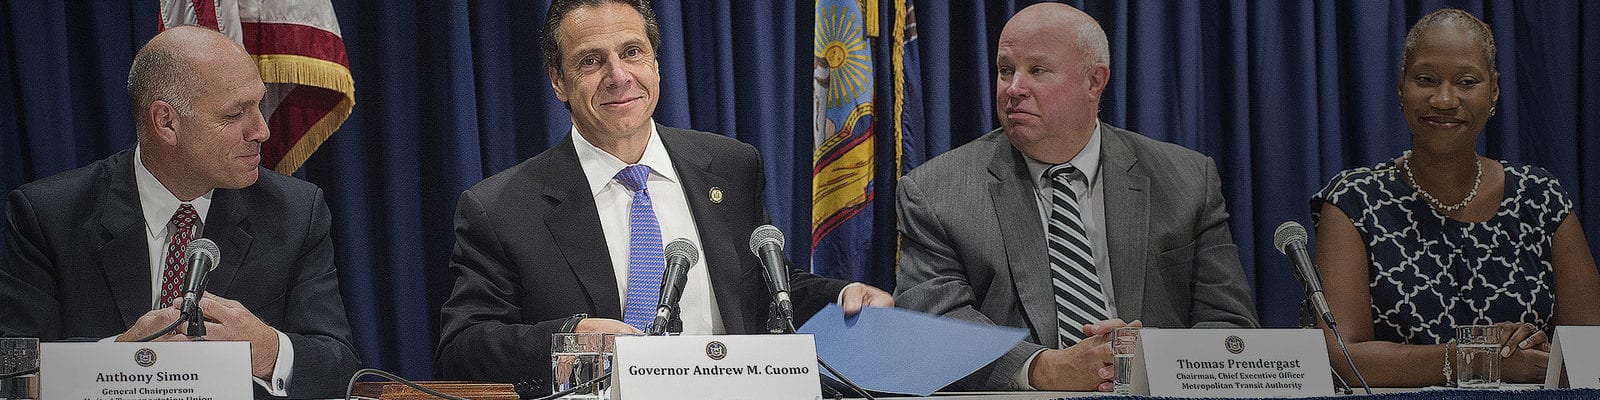 New York Gov. Andrew Cuomo sits at a table of speakers at a community event.